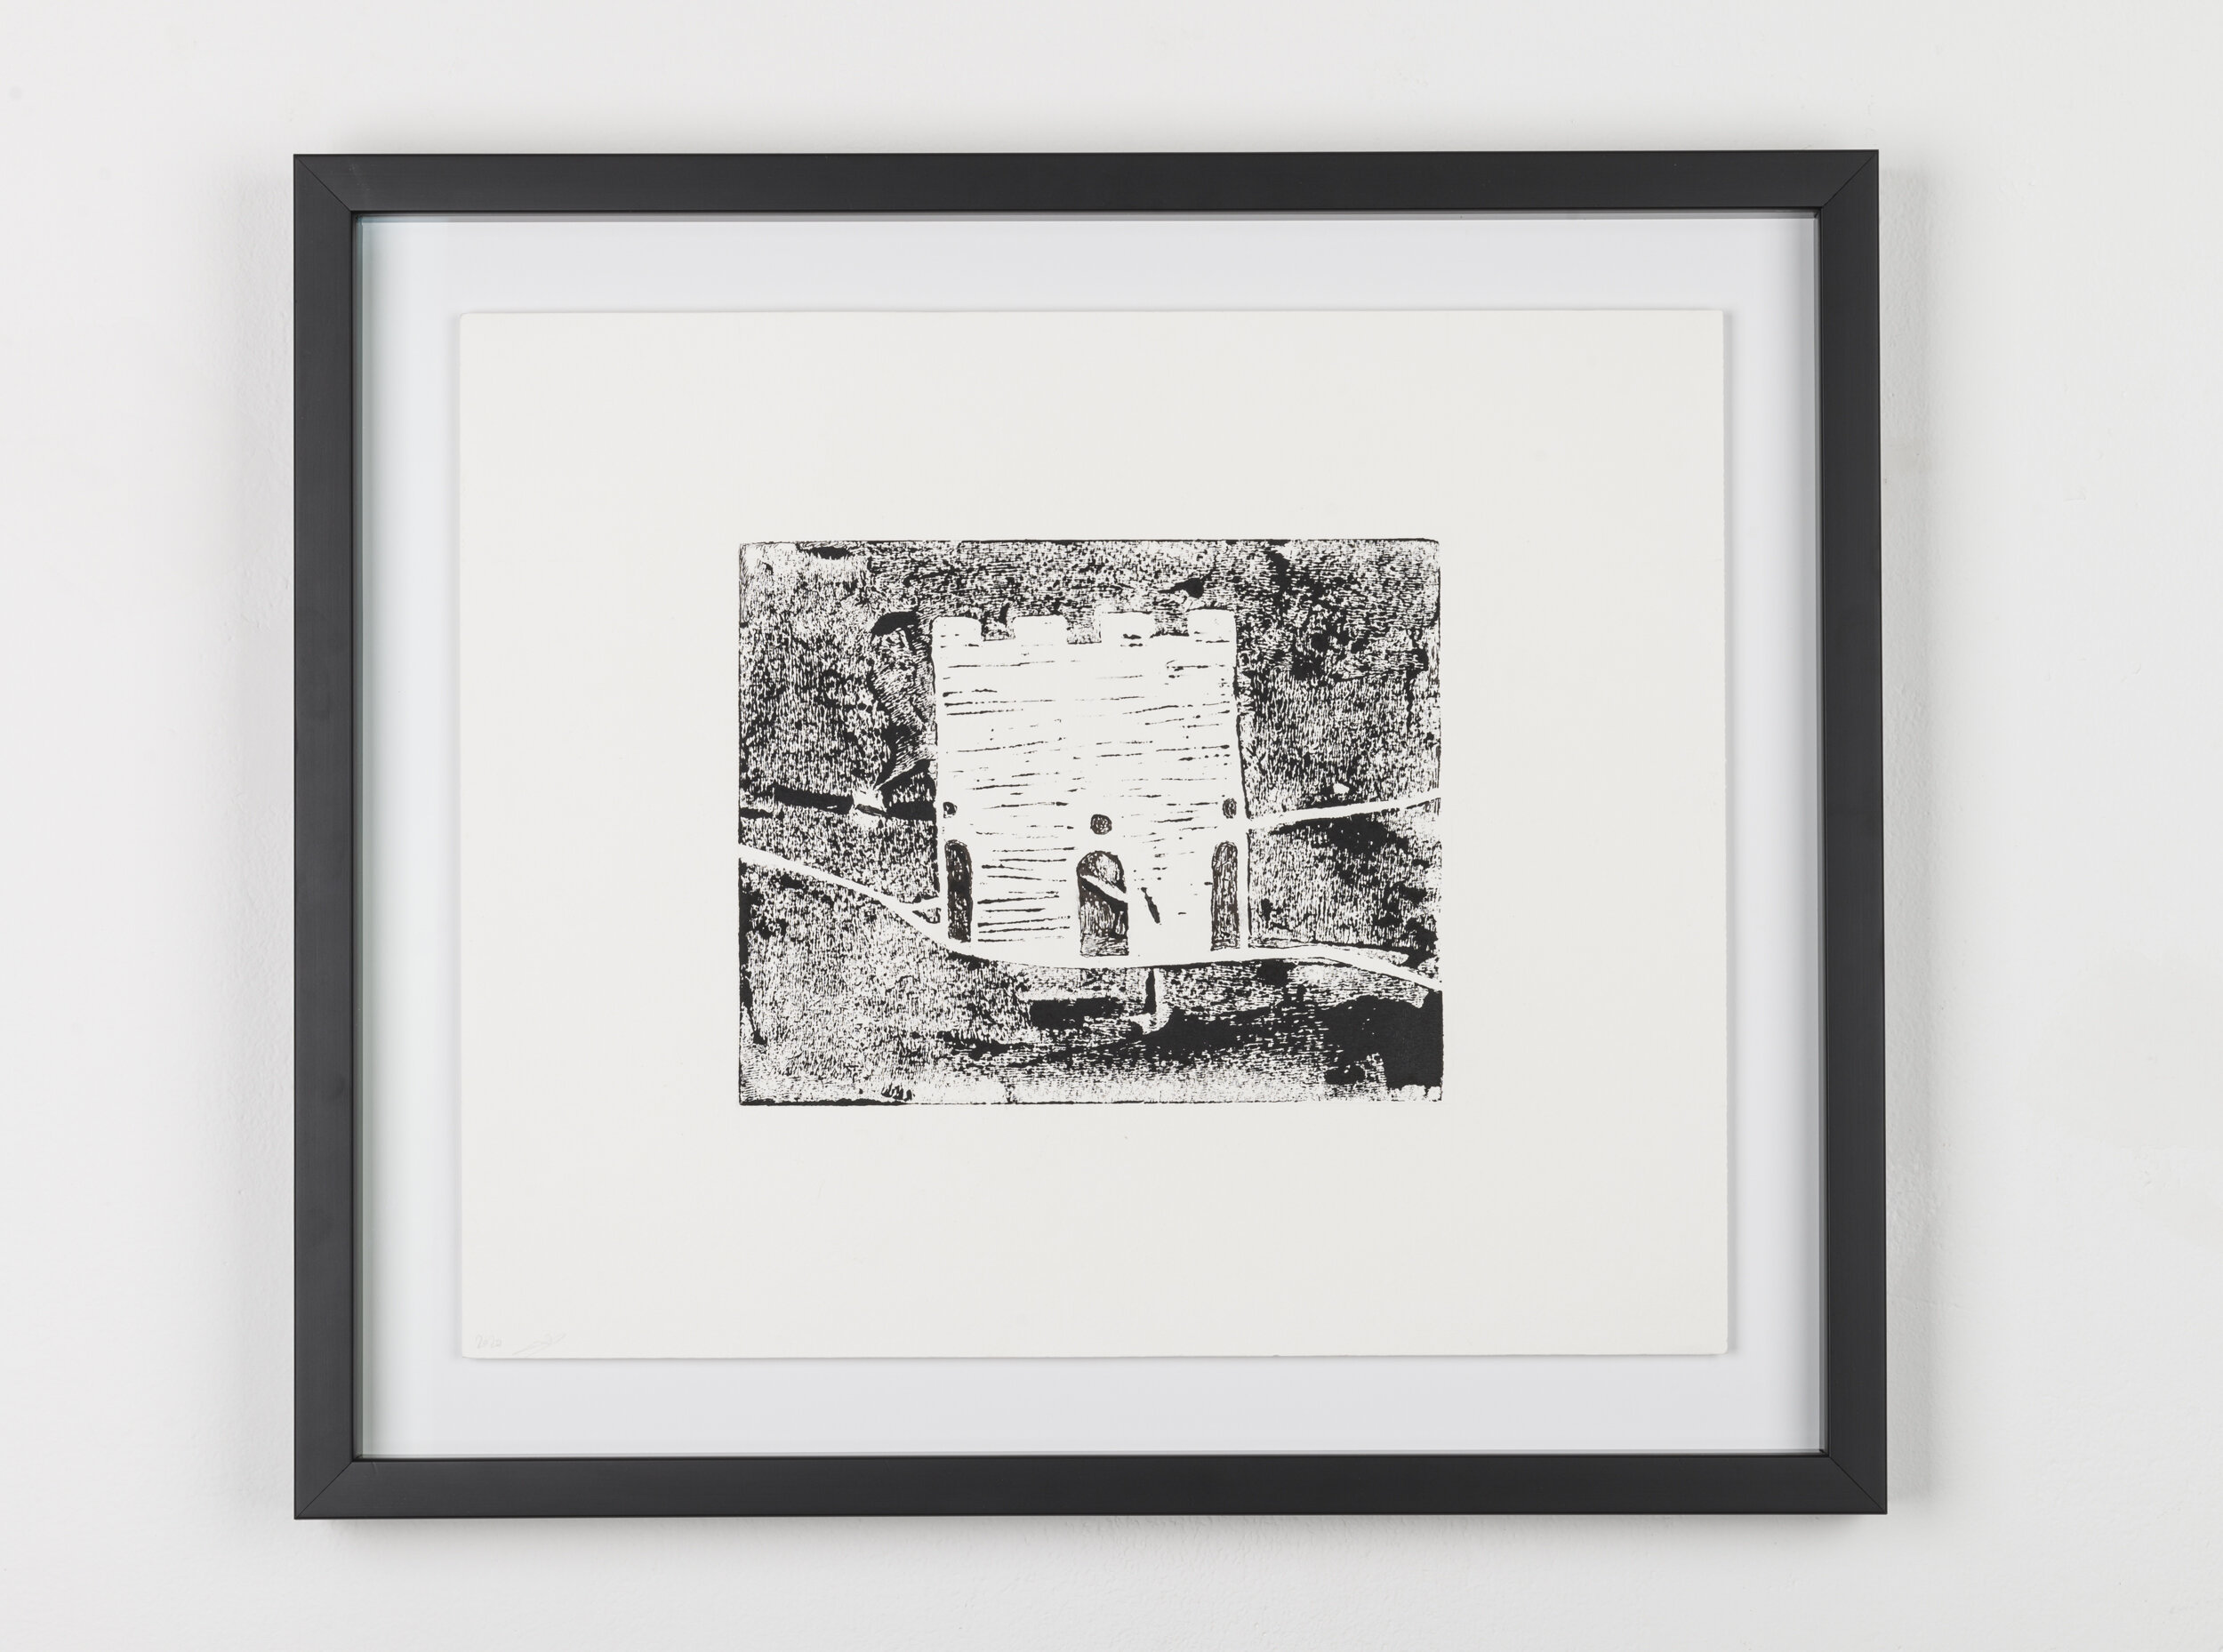 Untitled, wood print on paper (300g), 56x47 cm, 2020. Photo credit: Doron Oved